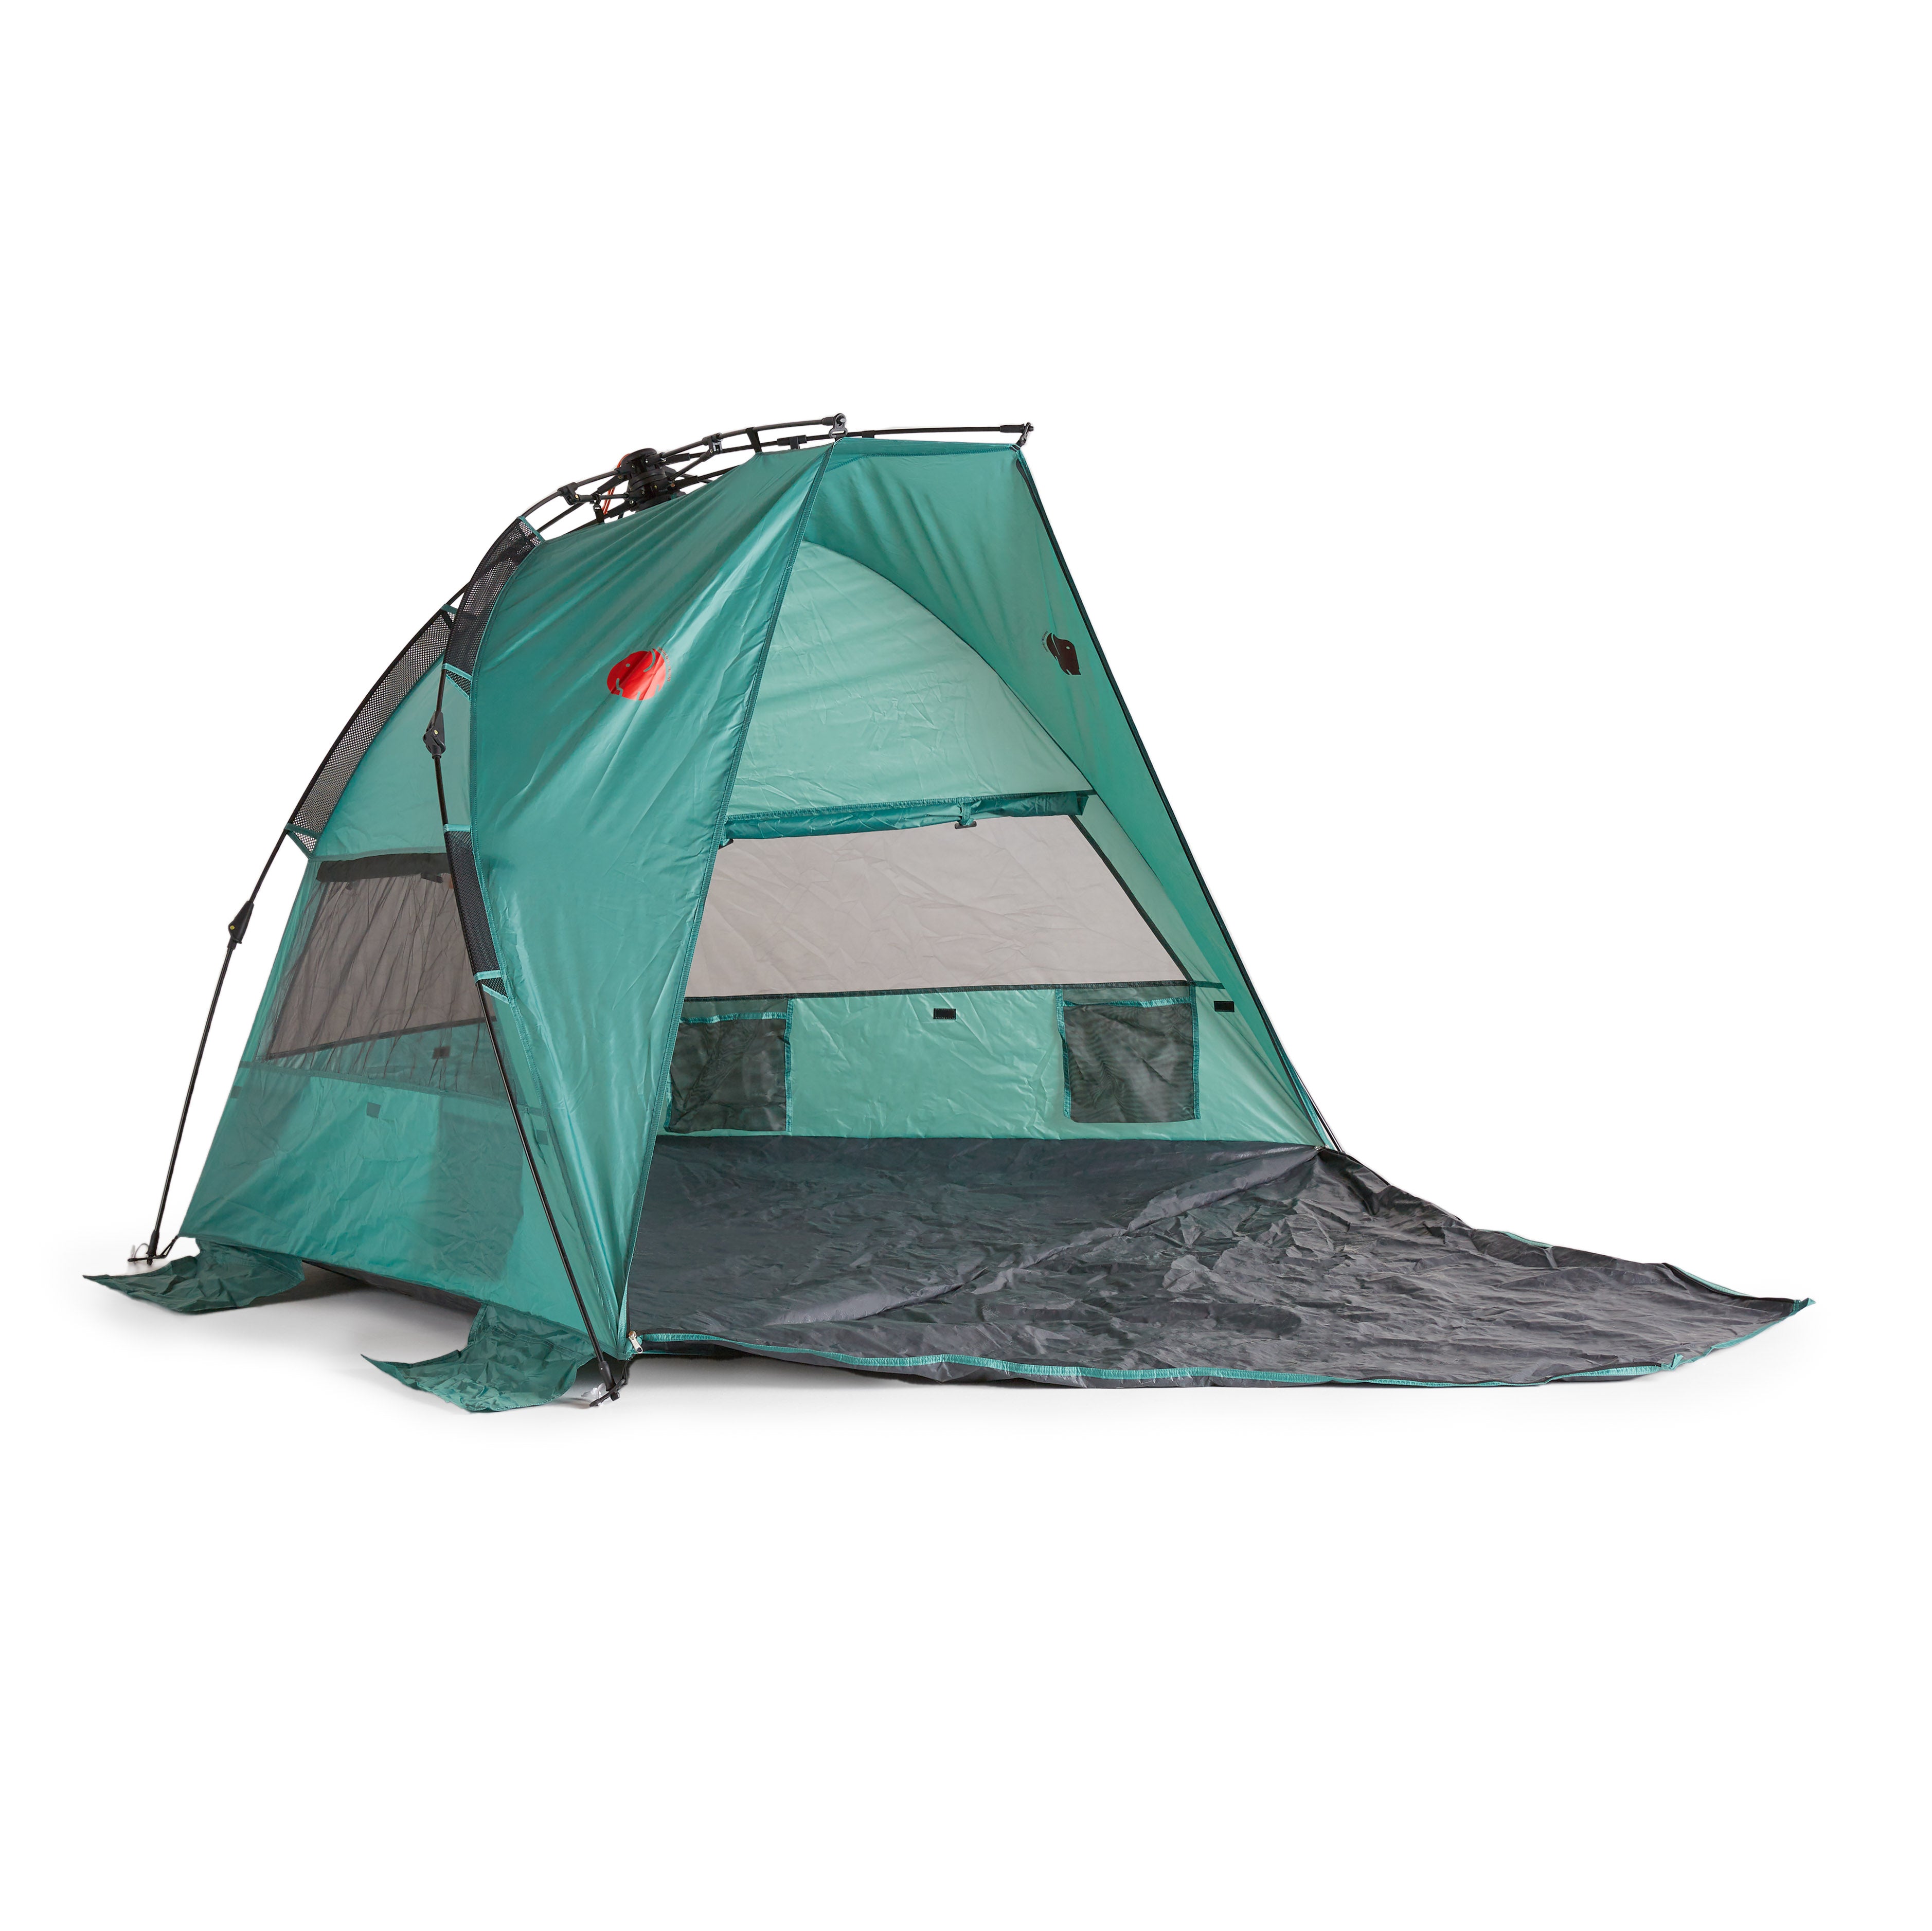 OMNICORE DESIGNS XL 4 Person Pop Up EASY SET UP BEACH TENT - Green